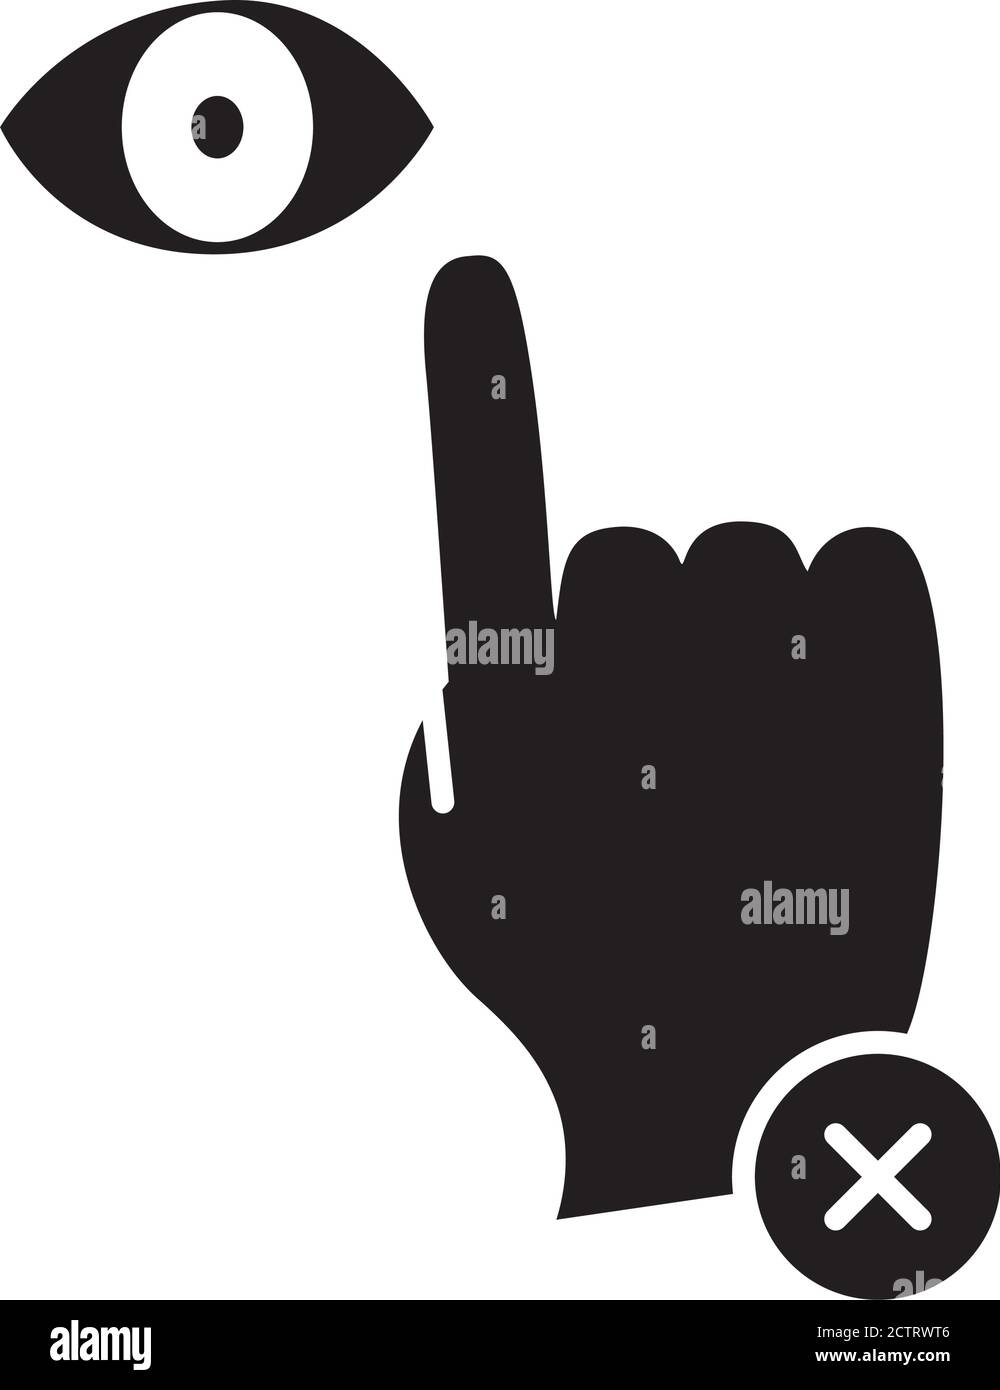 Symbol Of Do Not Touch Your Eyes With The Hands Over White Background Silhouette Style Vector